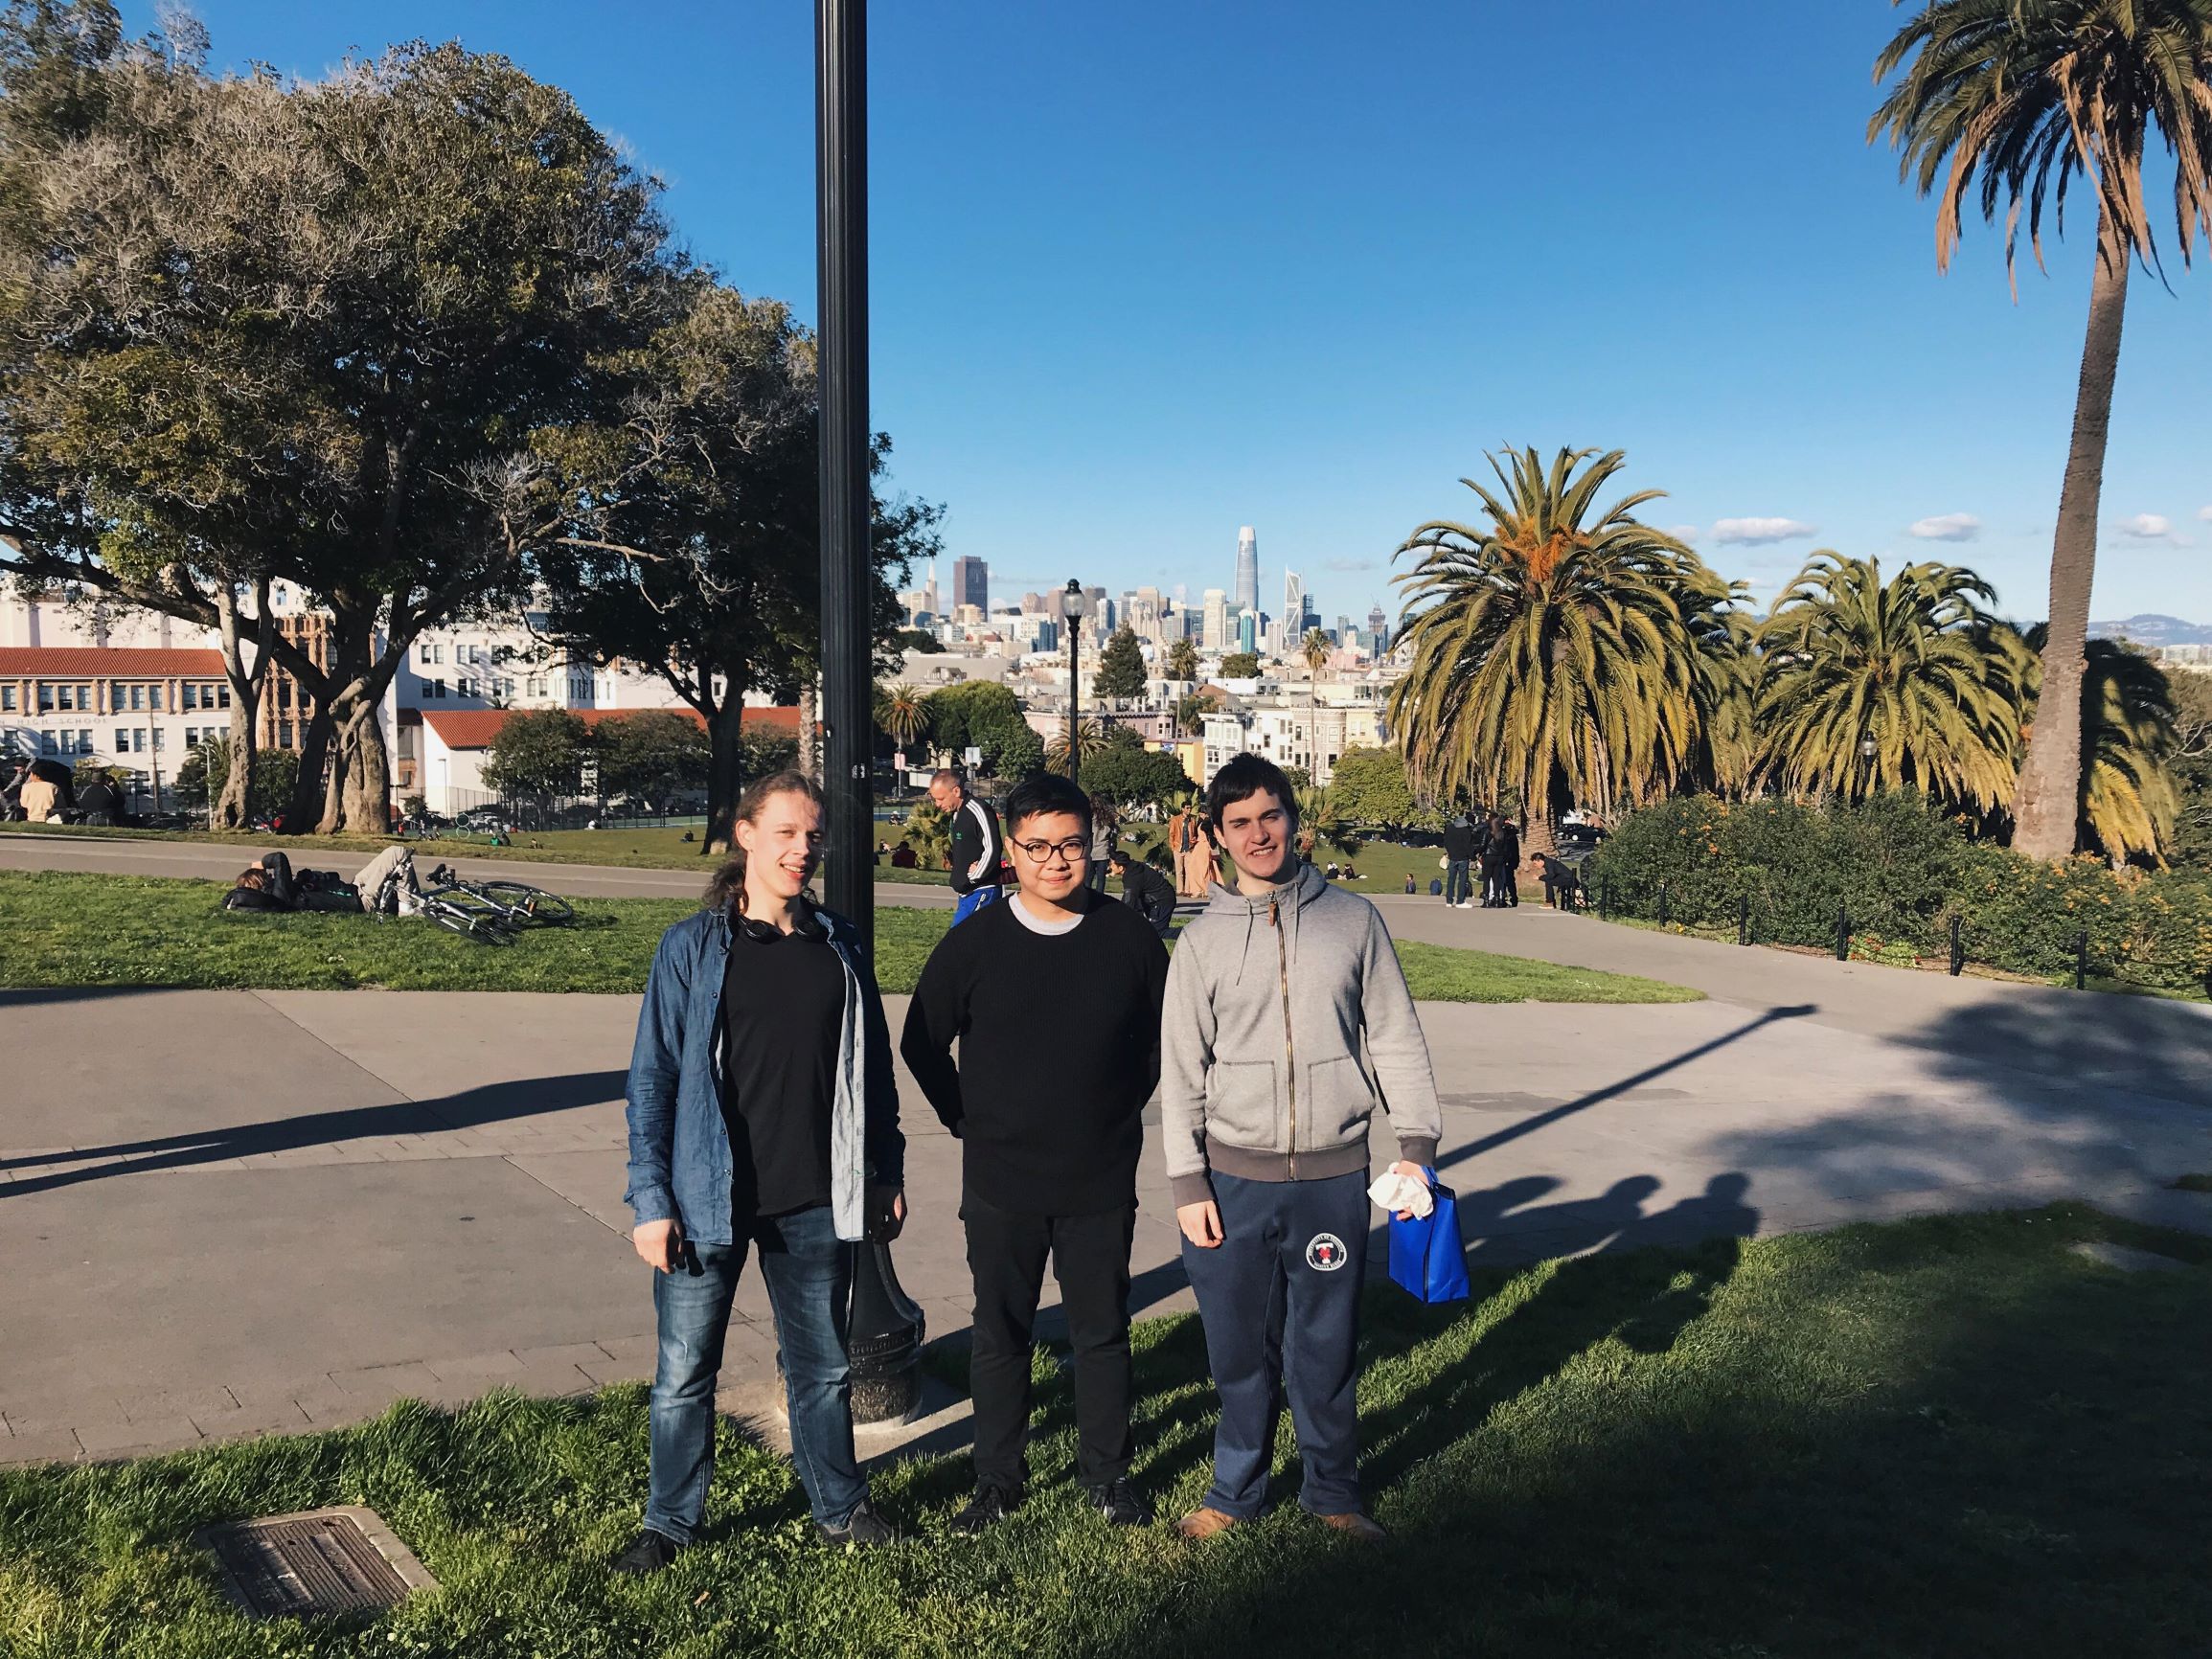 Roman, Ruben and Andre in Dolores Park, San Francisco.